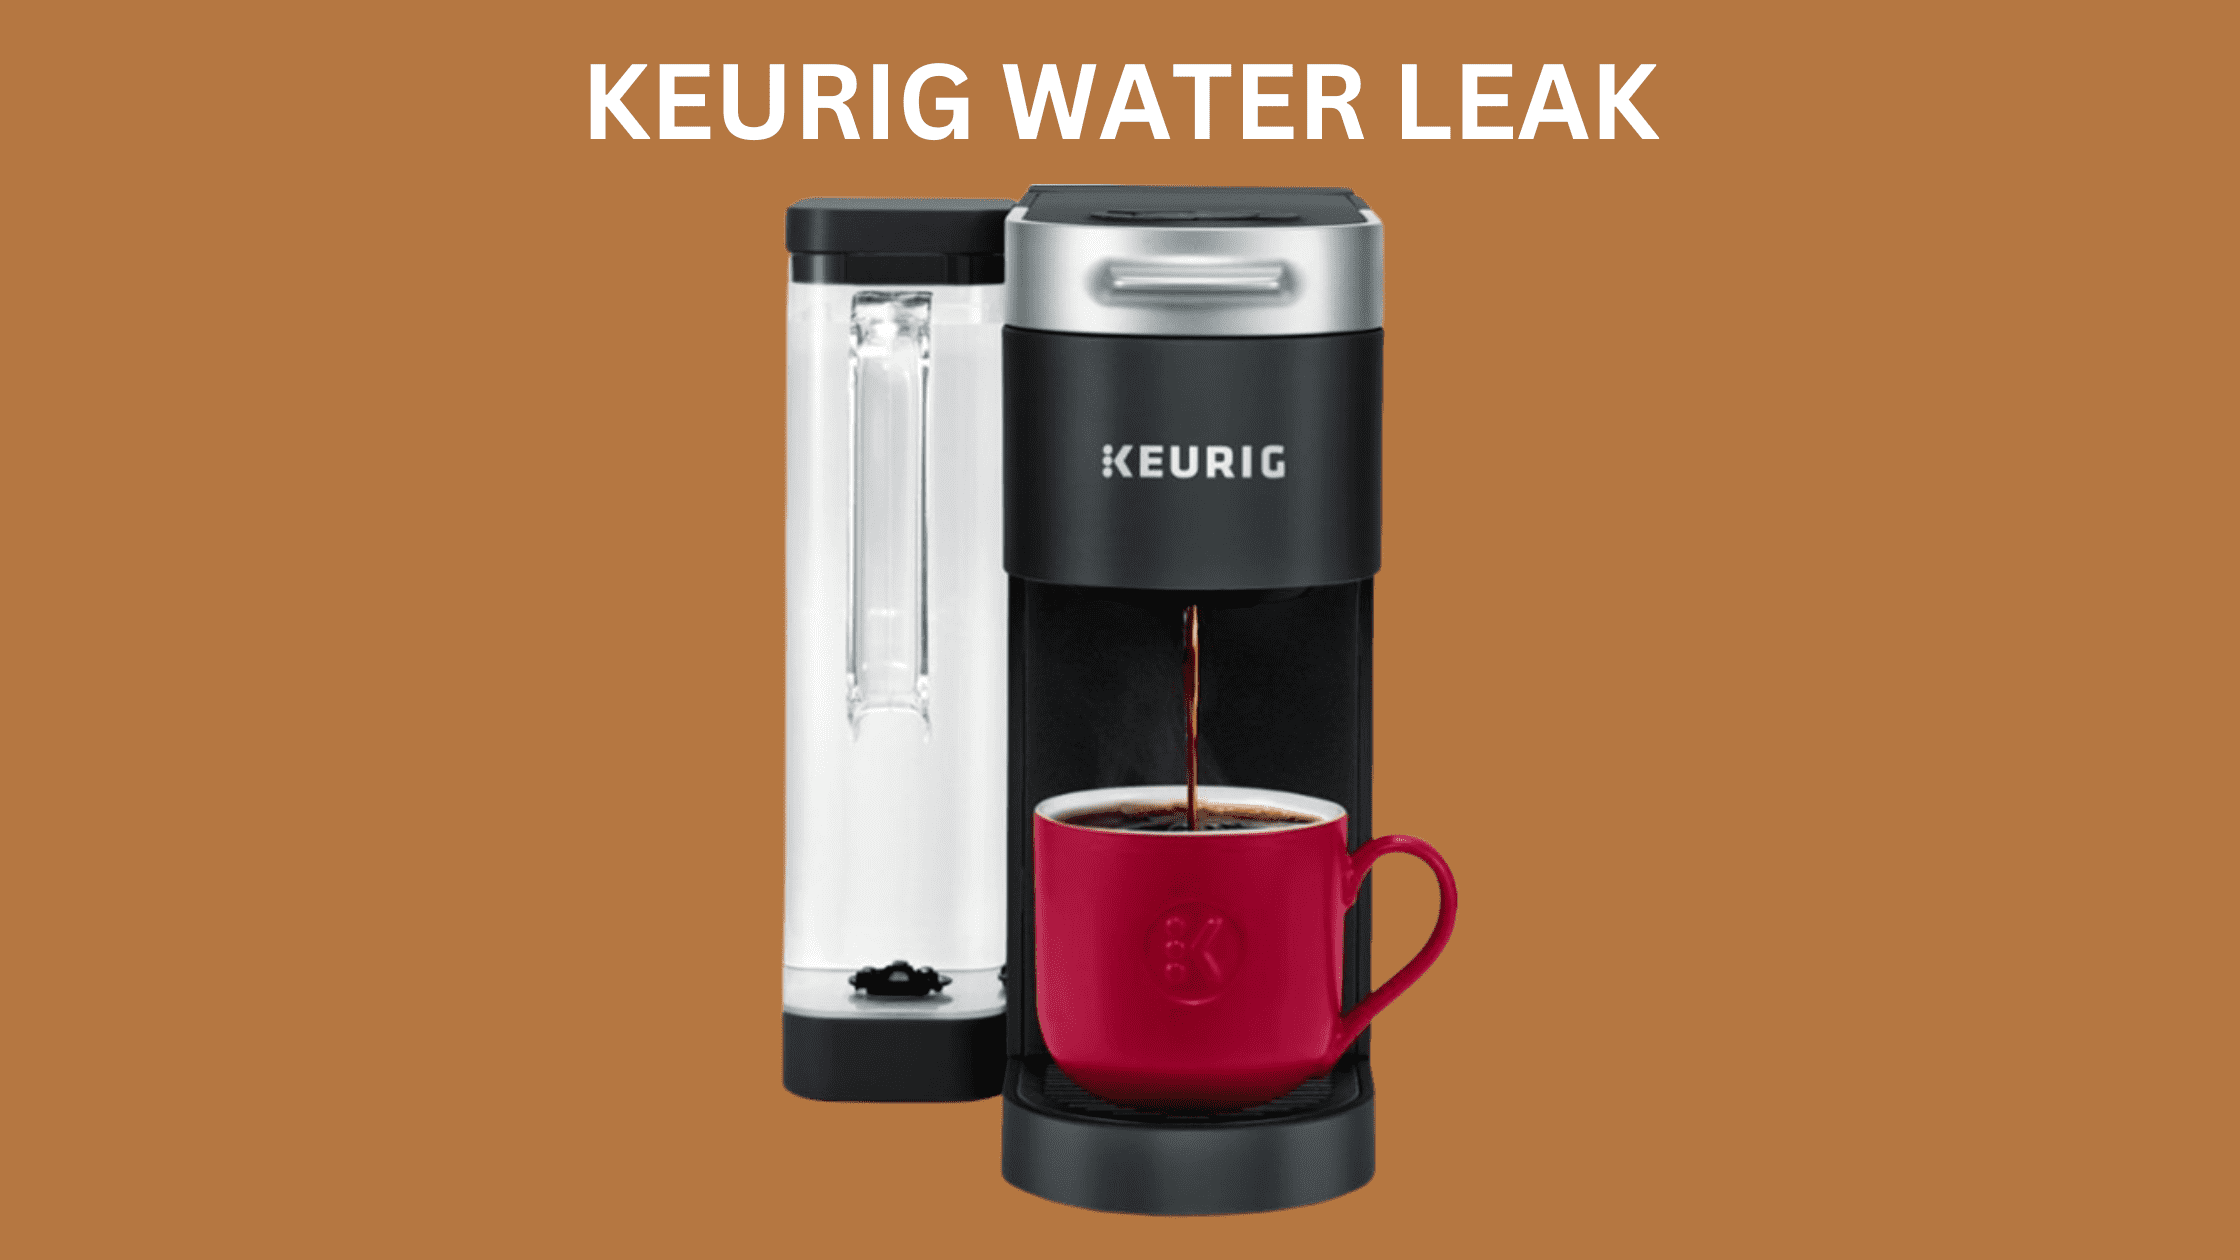 Troubleshooting a Leaking Keurig: A Guide to Water Leakage